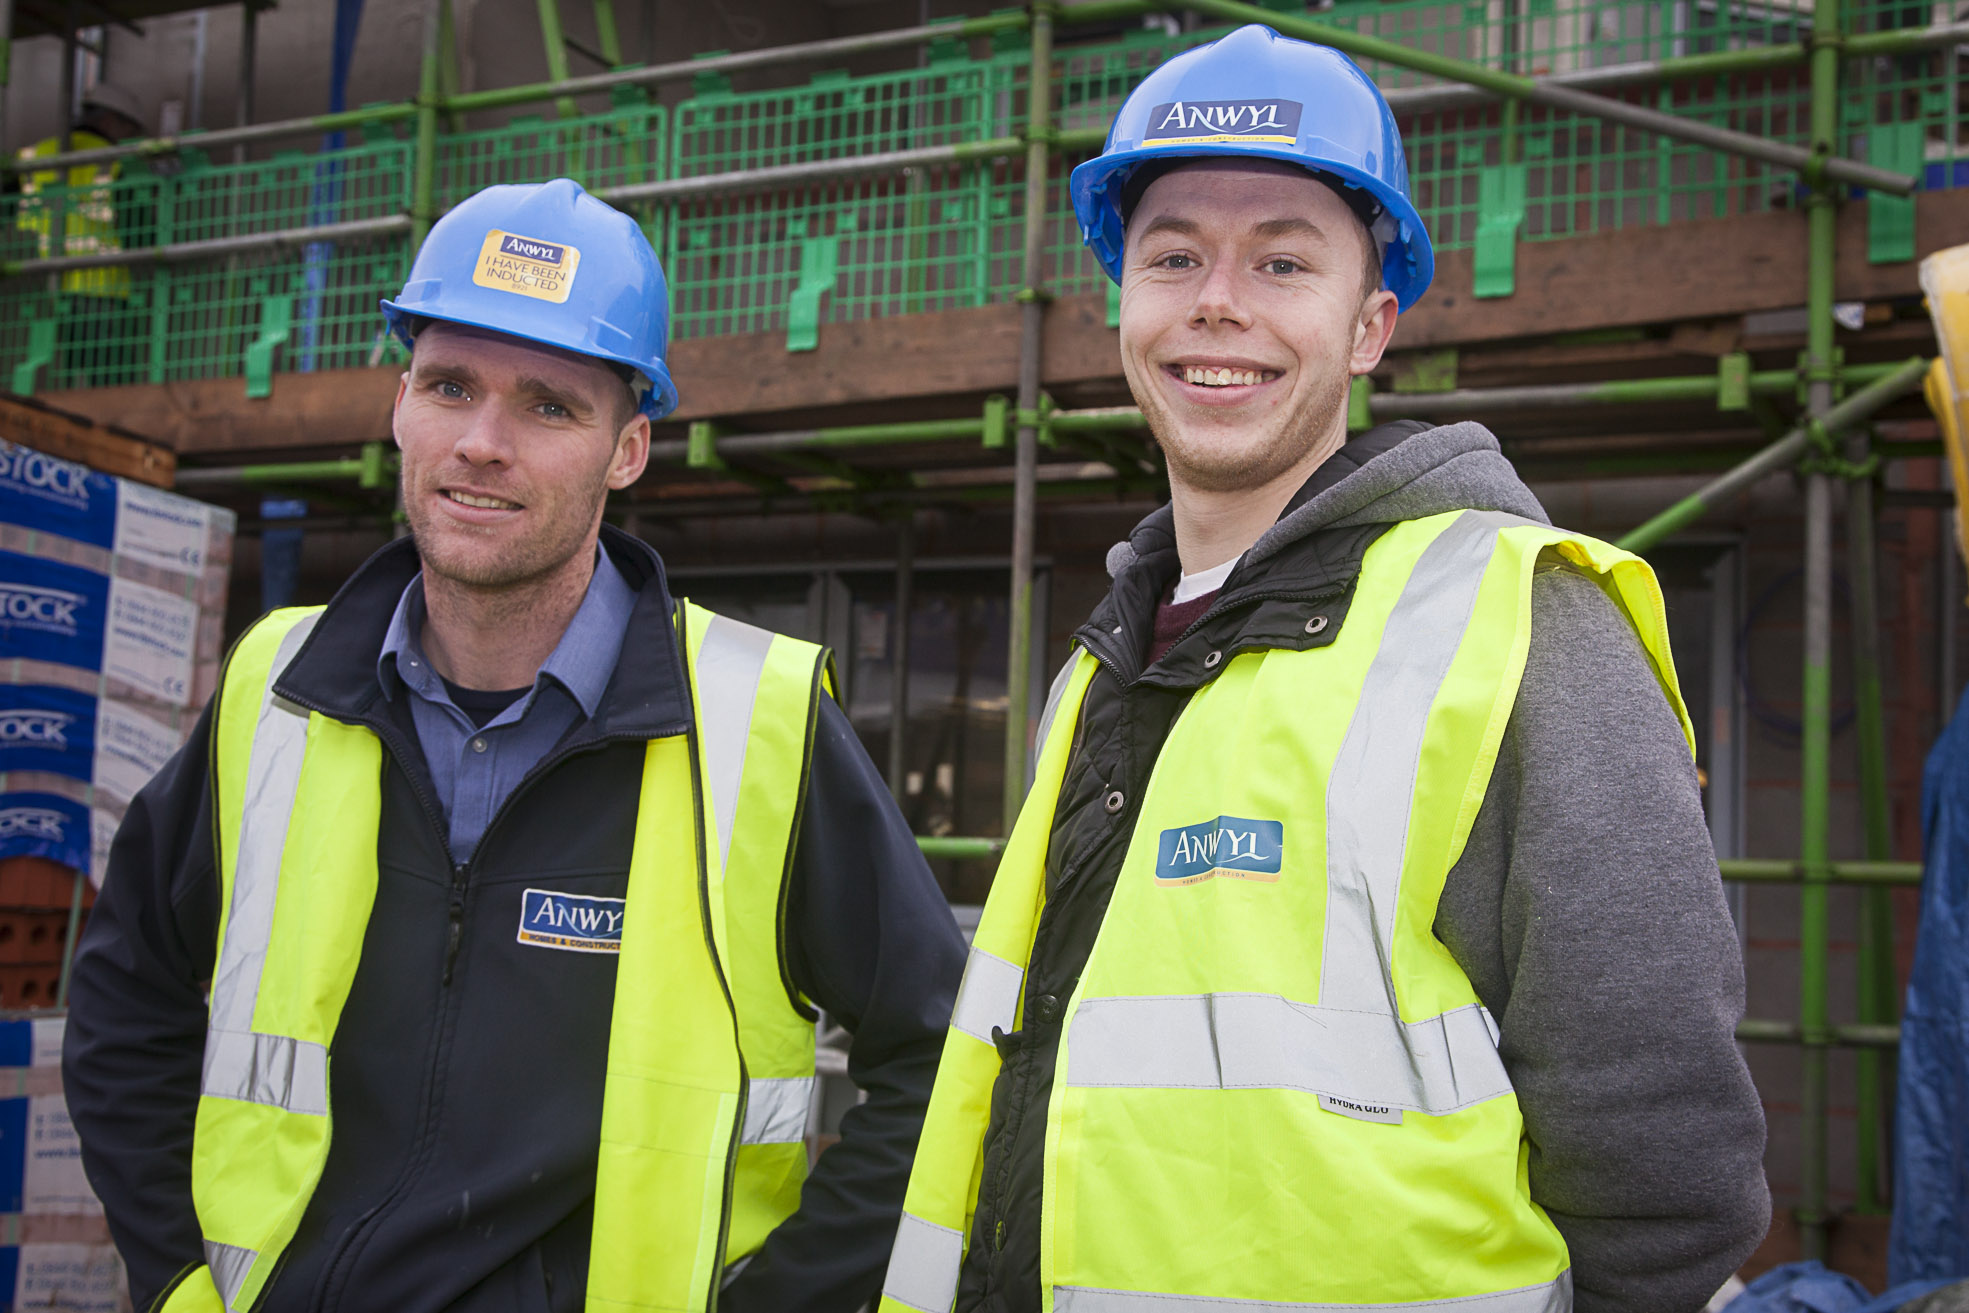 Unemployed offered work placements on £5m Chirk construction scheme